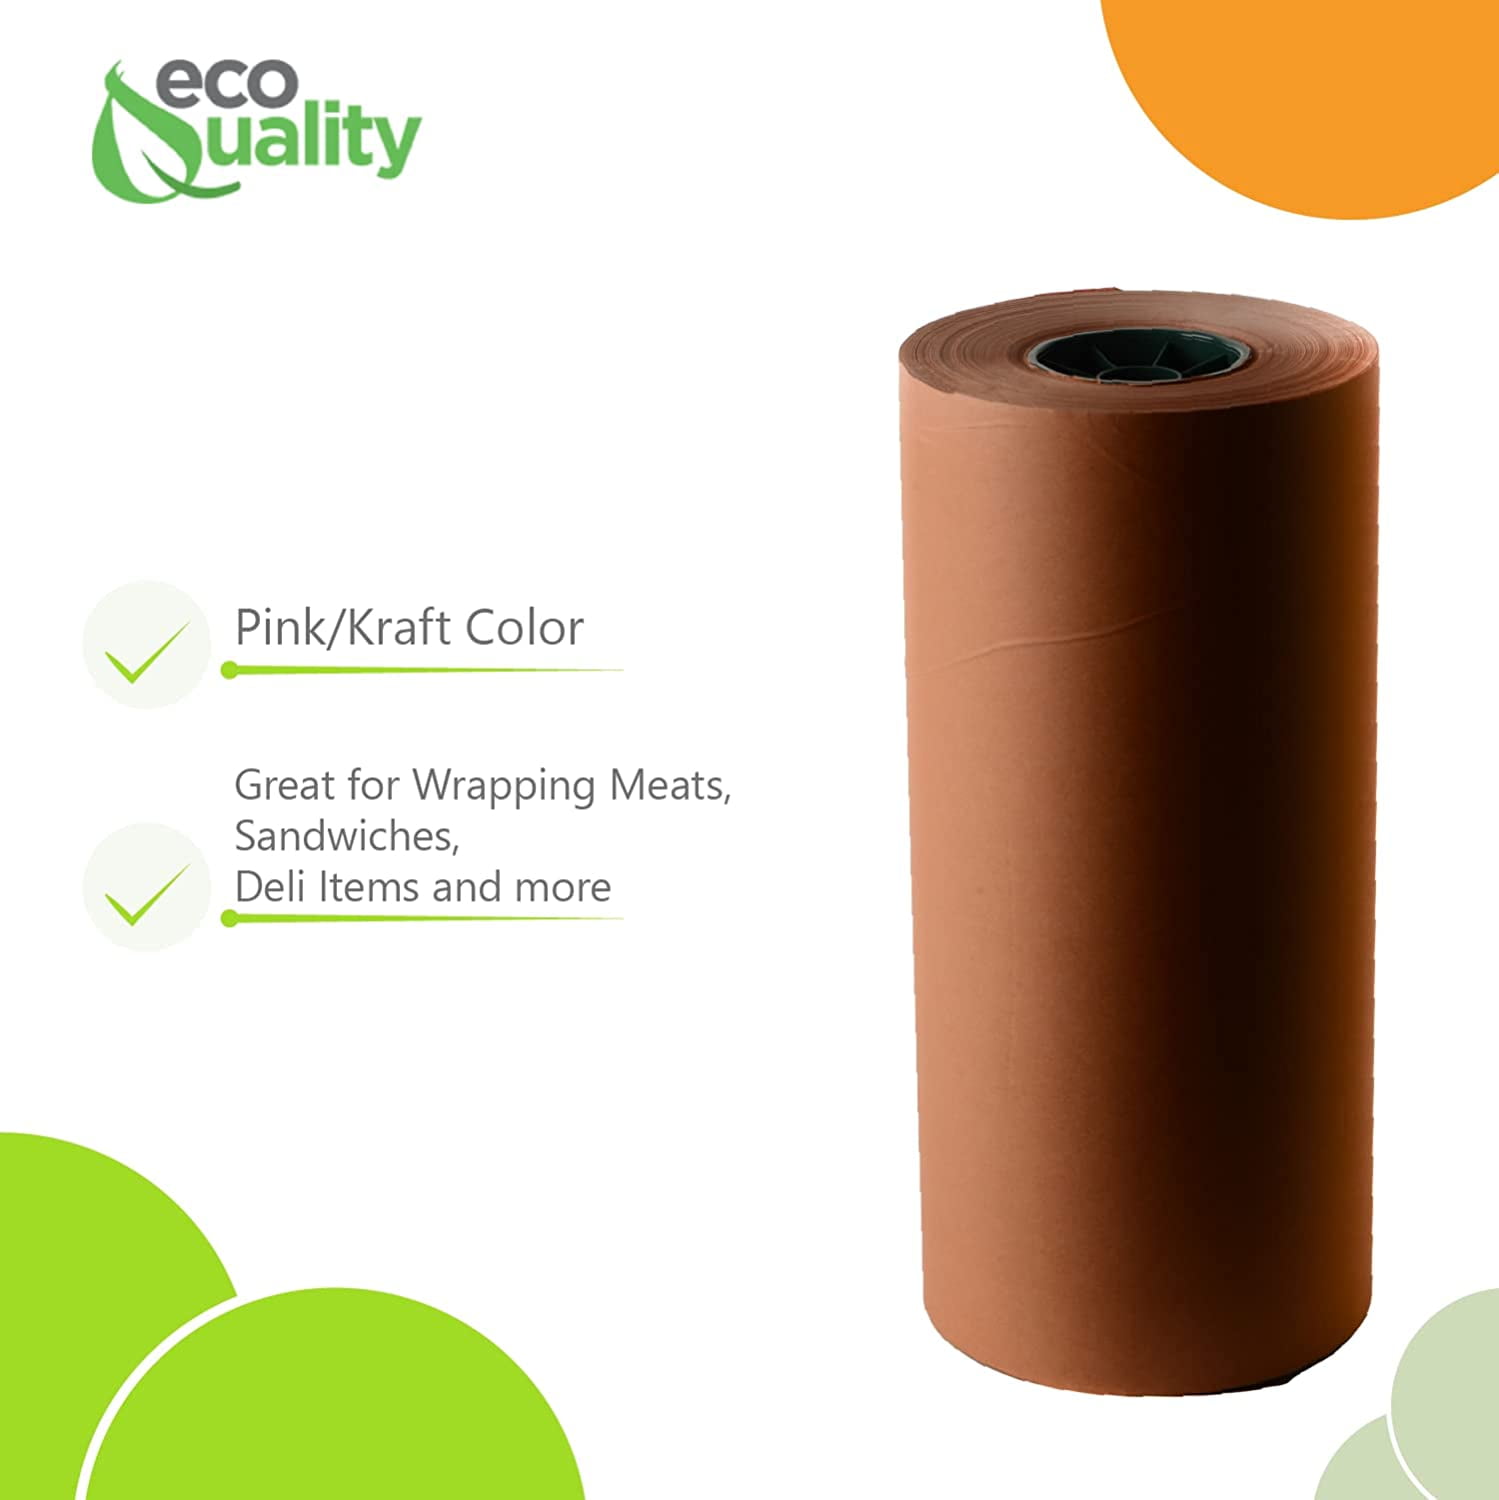 Udareit Butcher Paper for Smoking Meat Pink Butcher Paper Roll Unwaxed 12 inch x 60 Feet, BBQ Peach Wrapping Paper for Smoking Meat, Brisket, Crawfish